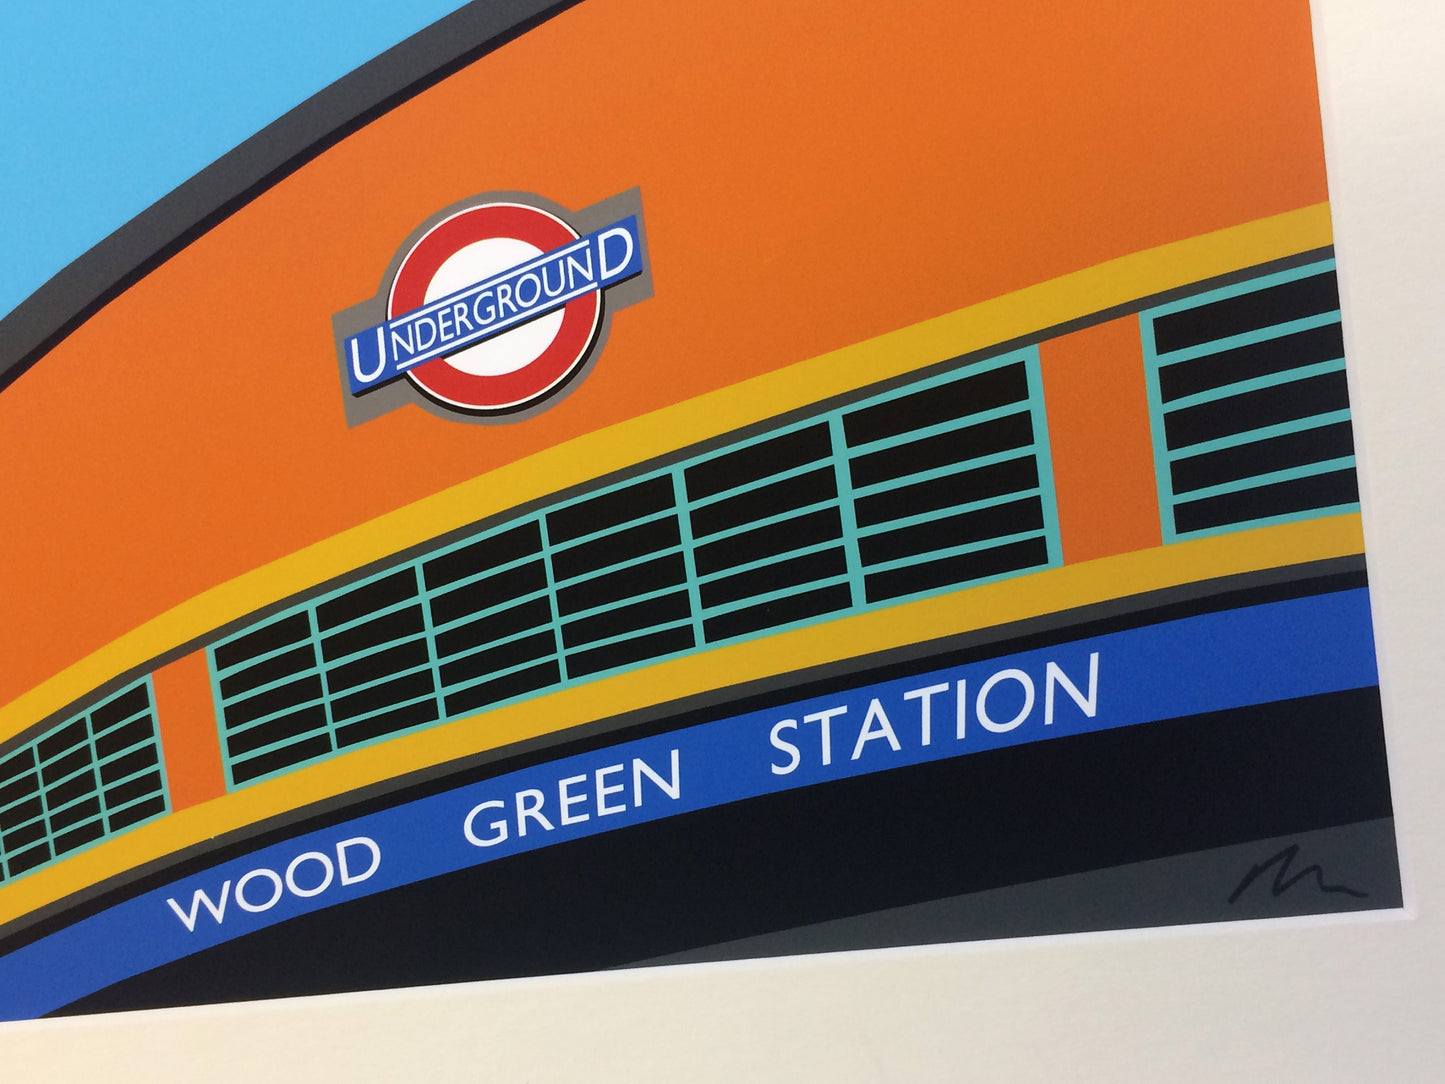 Wood Green Station - Mounted Print - London Underground illustration Travel Poster - Art Deco Tube Station Series - by Rebecca Pymar